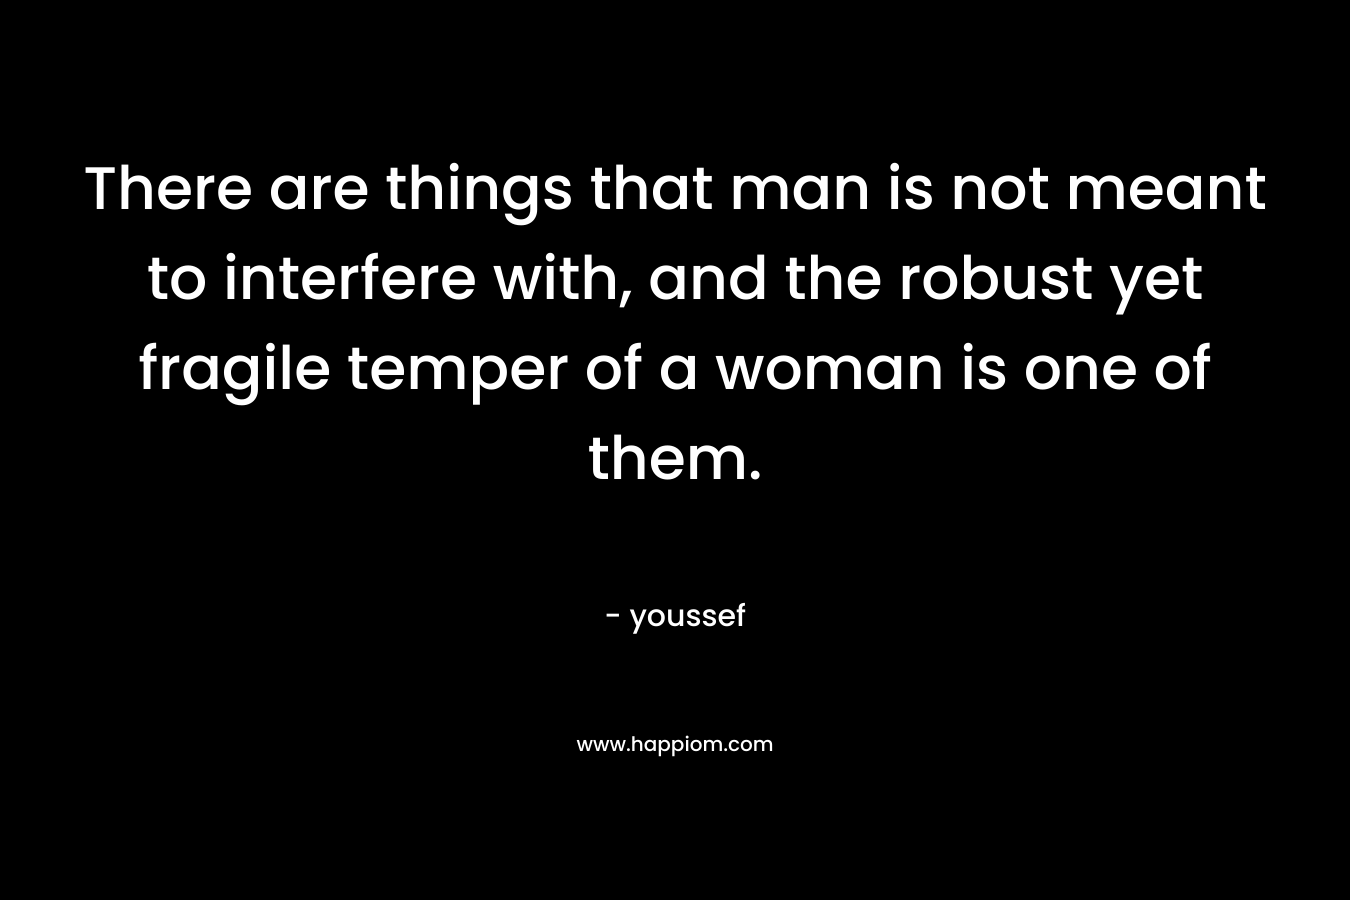 There are things that man is not meant to interfere with, and the robust yet fragile temper of a woman is one of them. – youssef